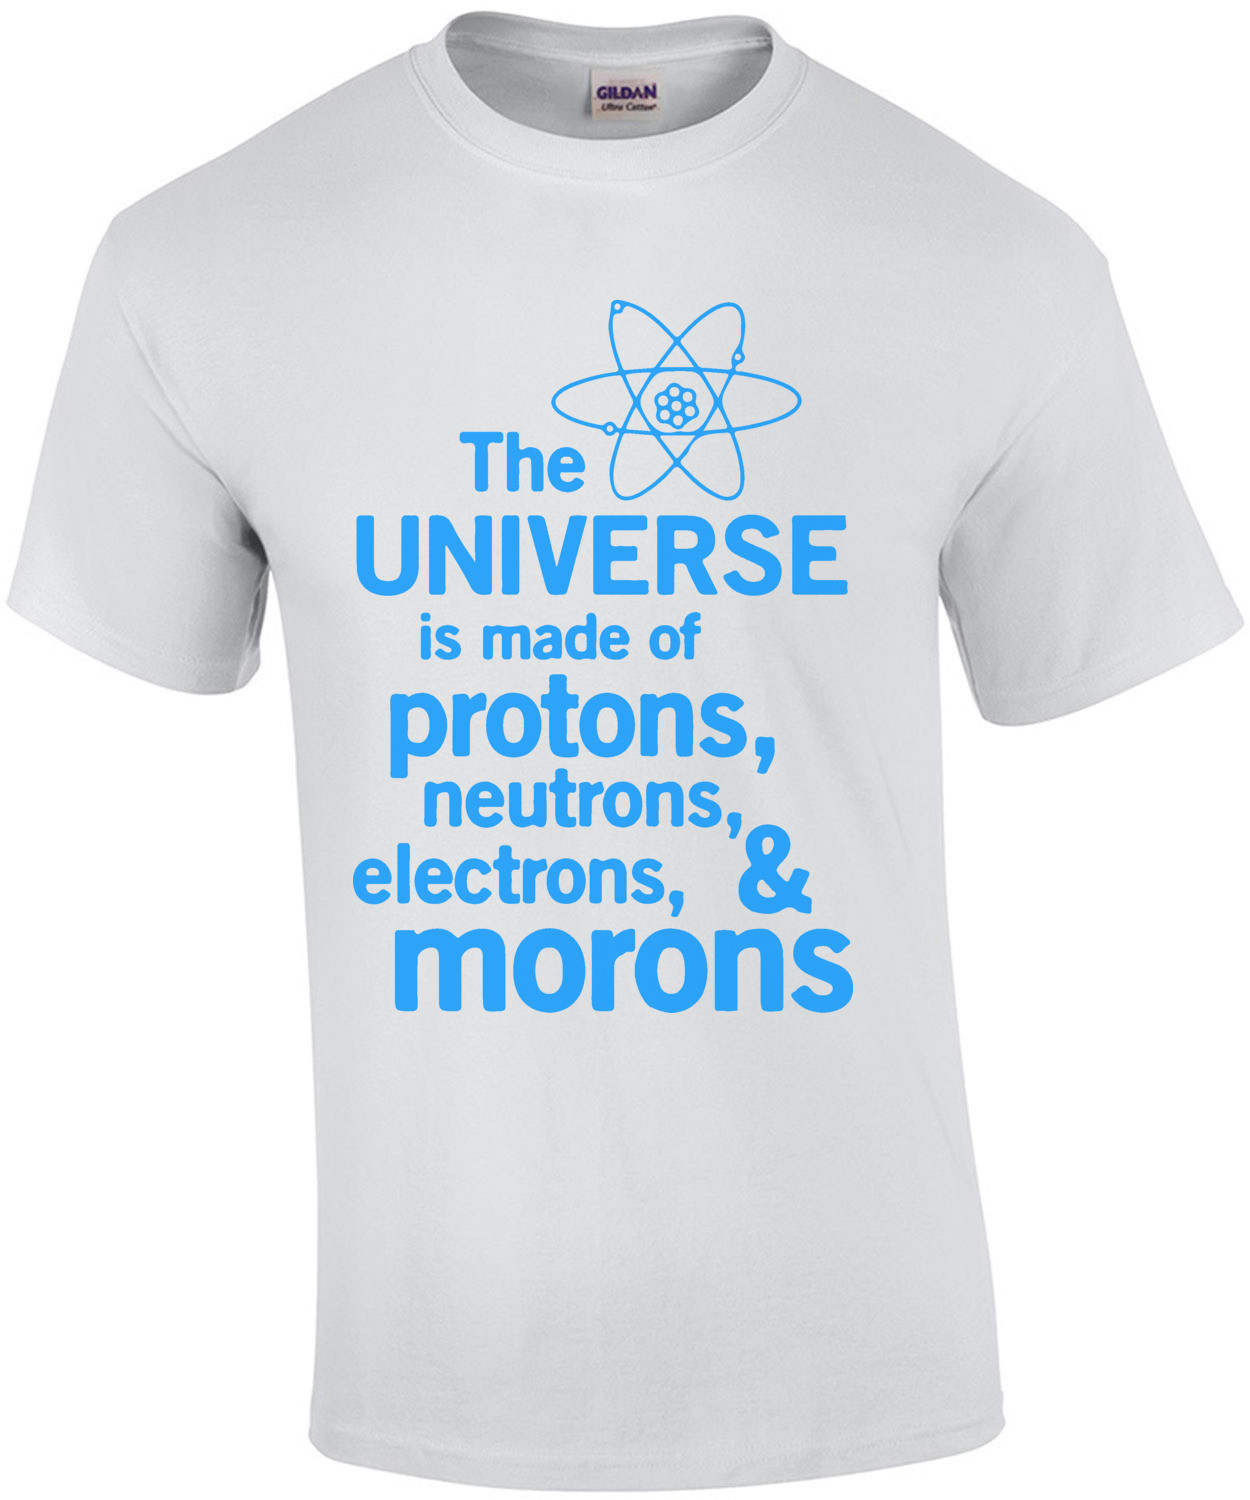 The universe is made of protons, neutrons, electrons, and morons. Funny